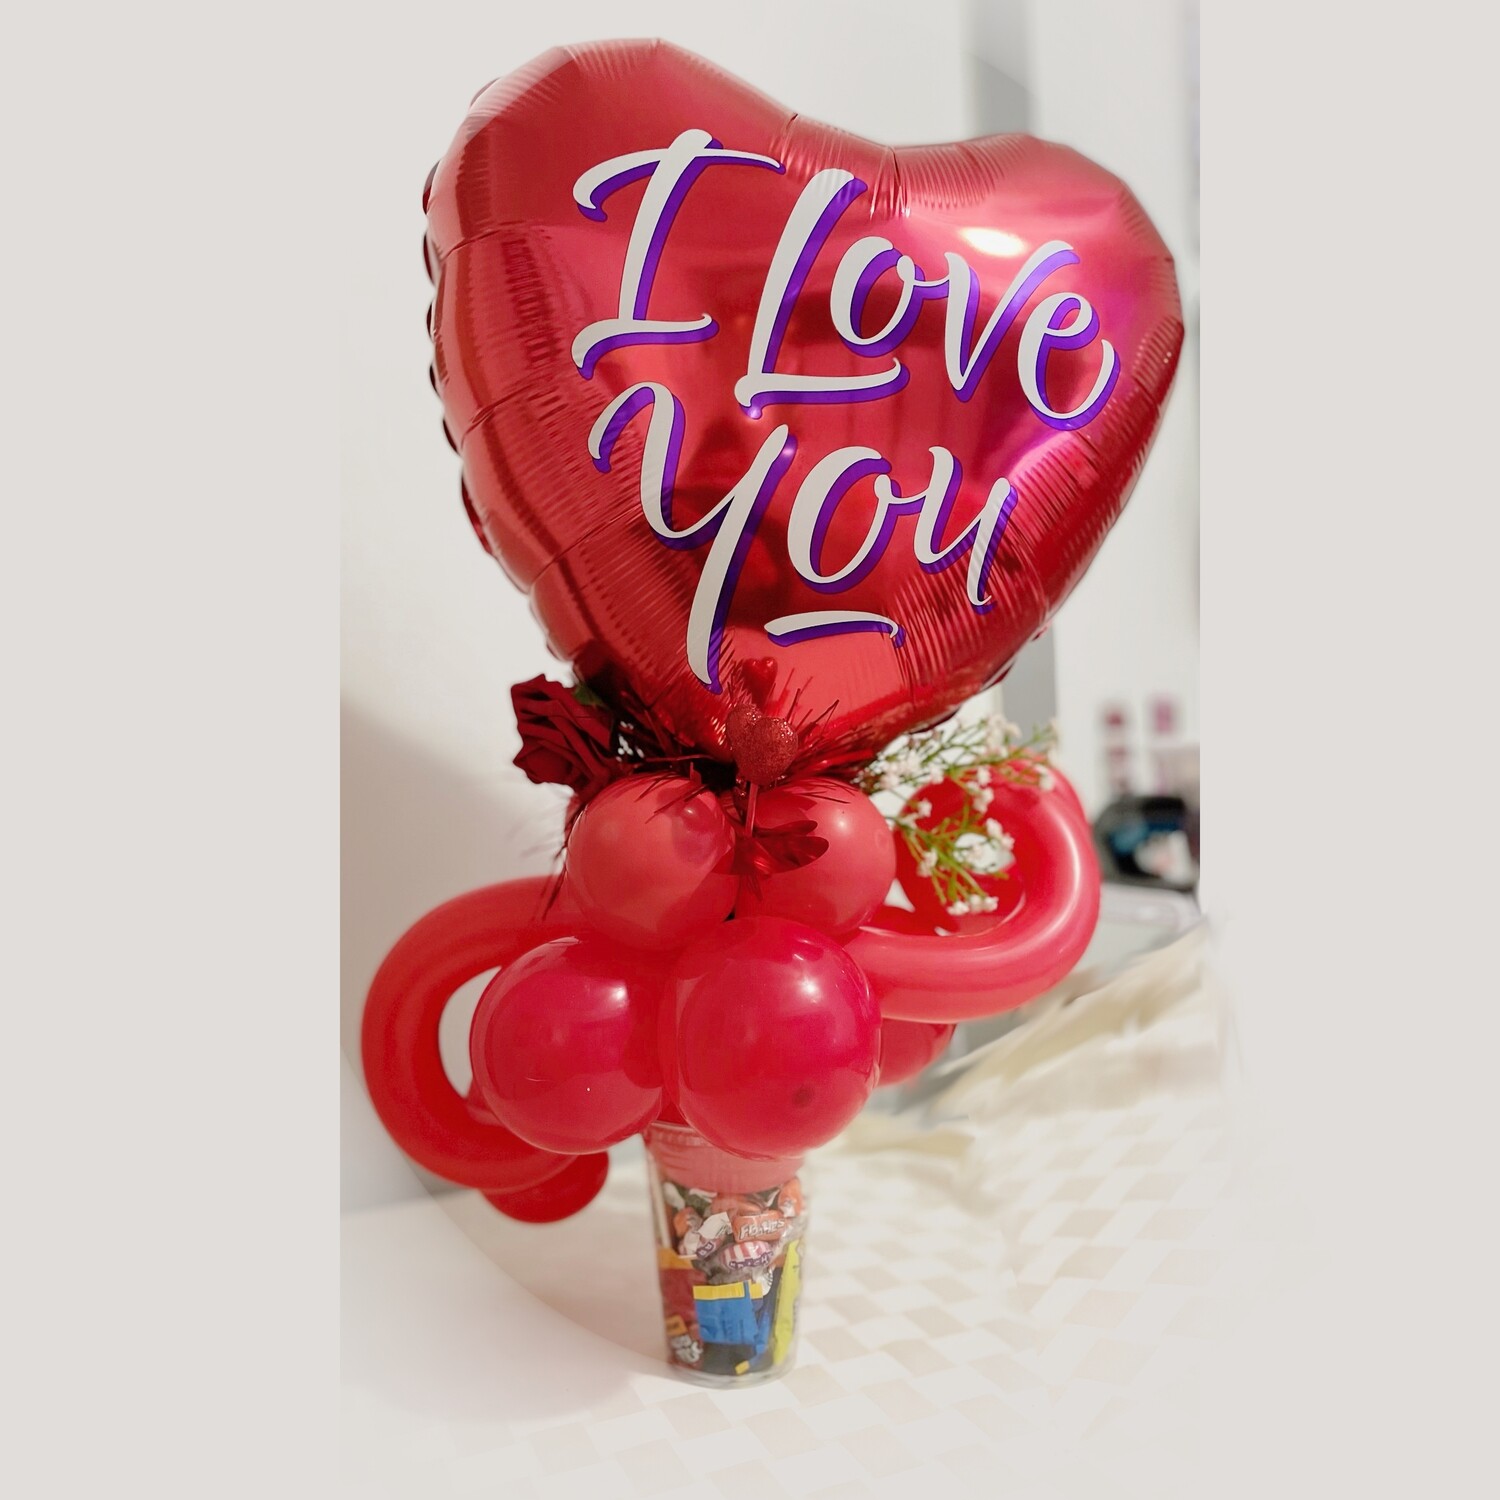 I love you heart balloon on a gift cup